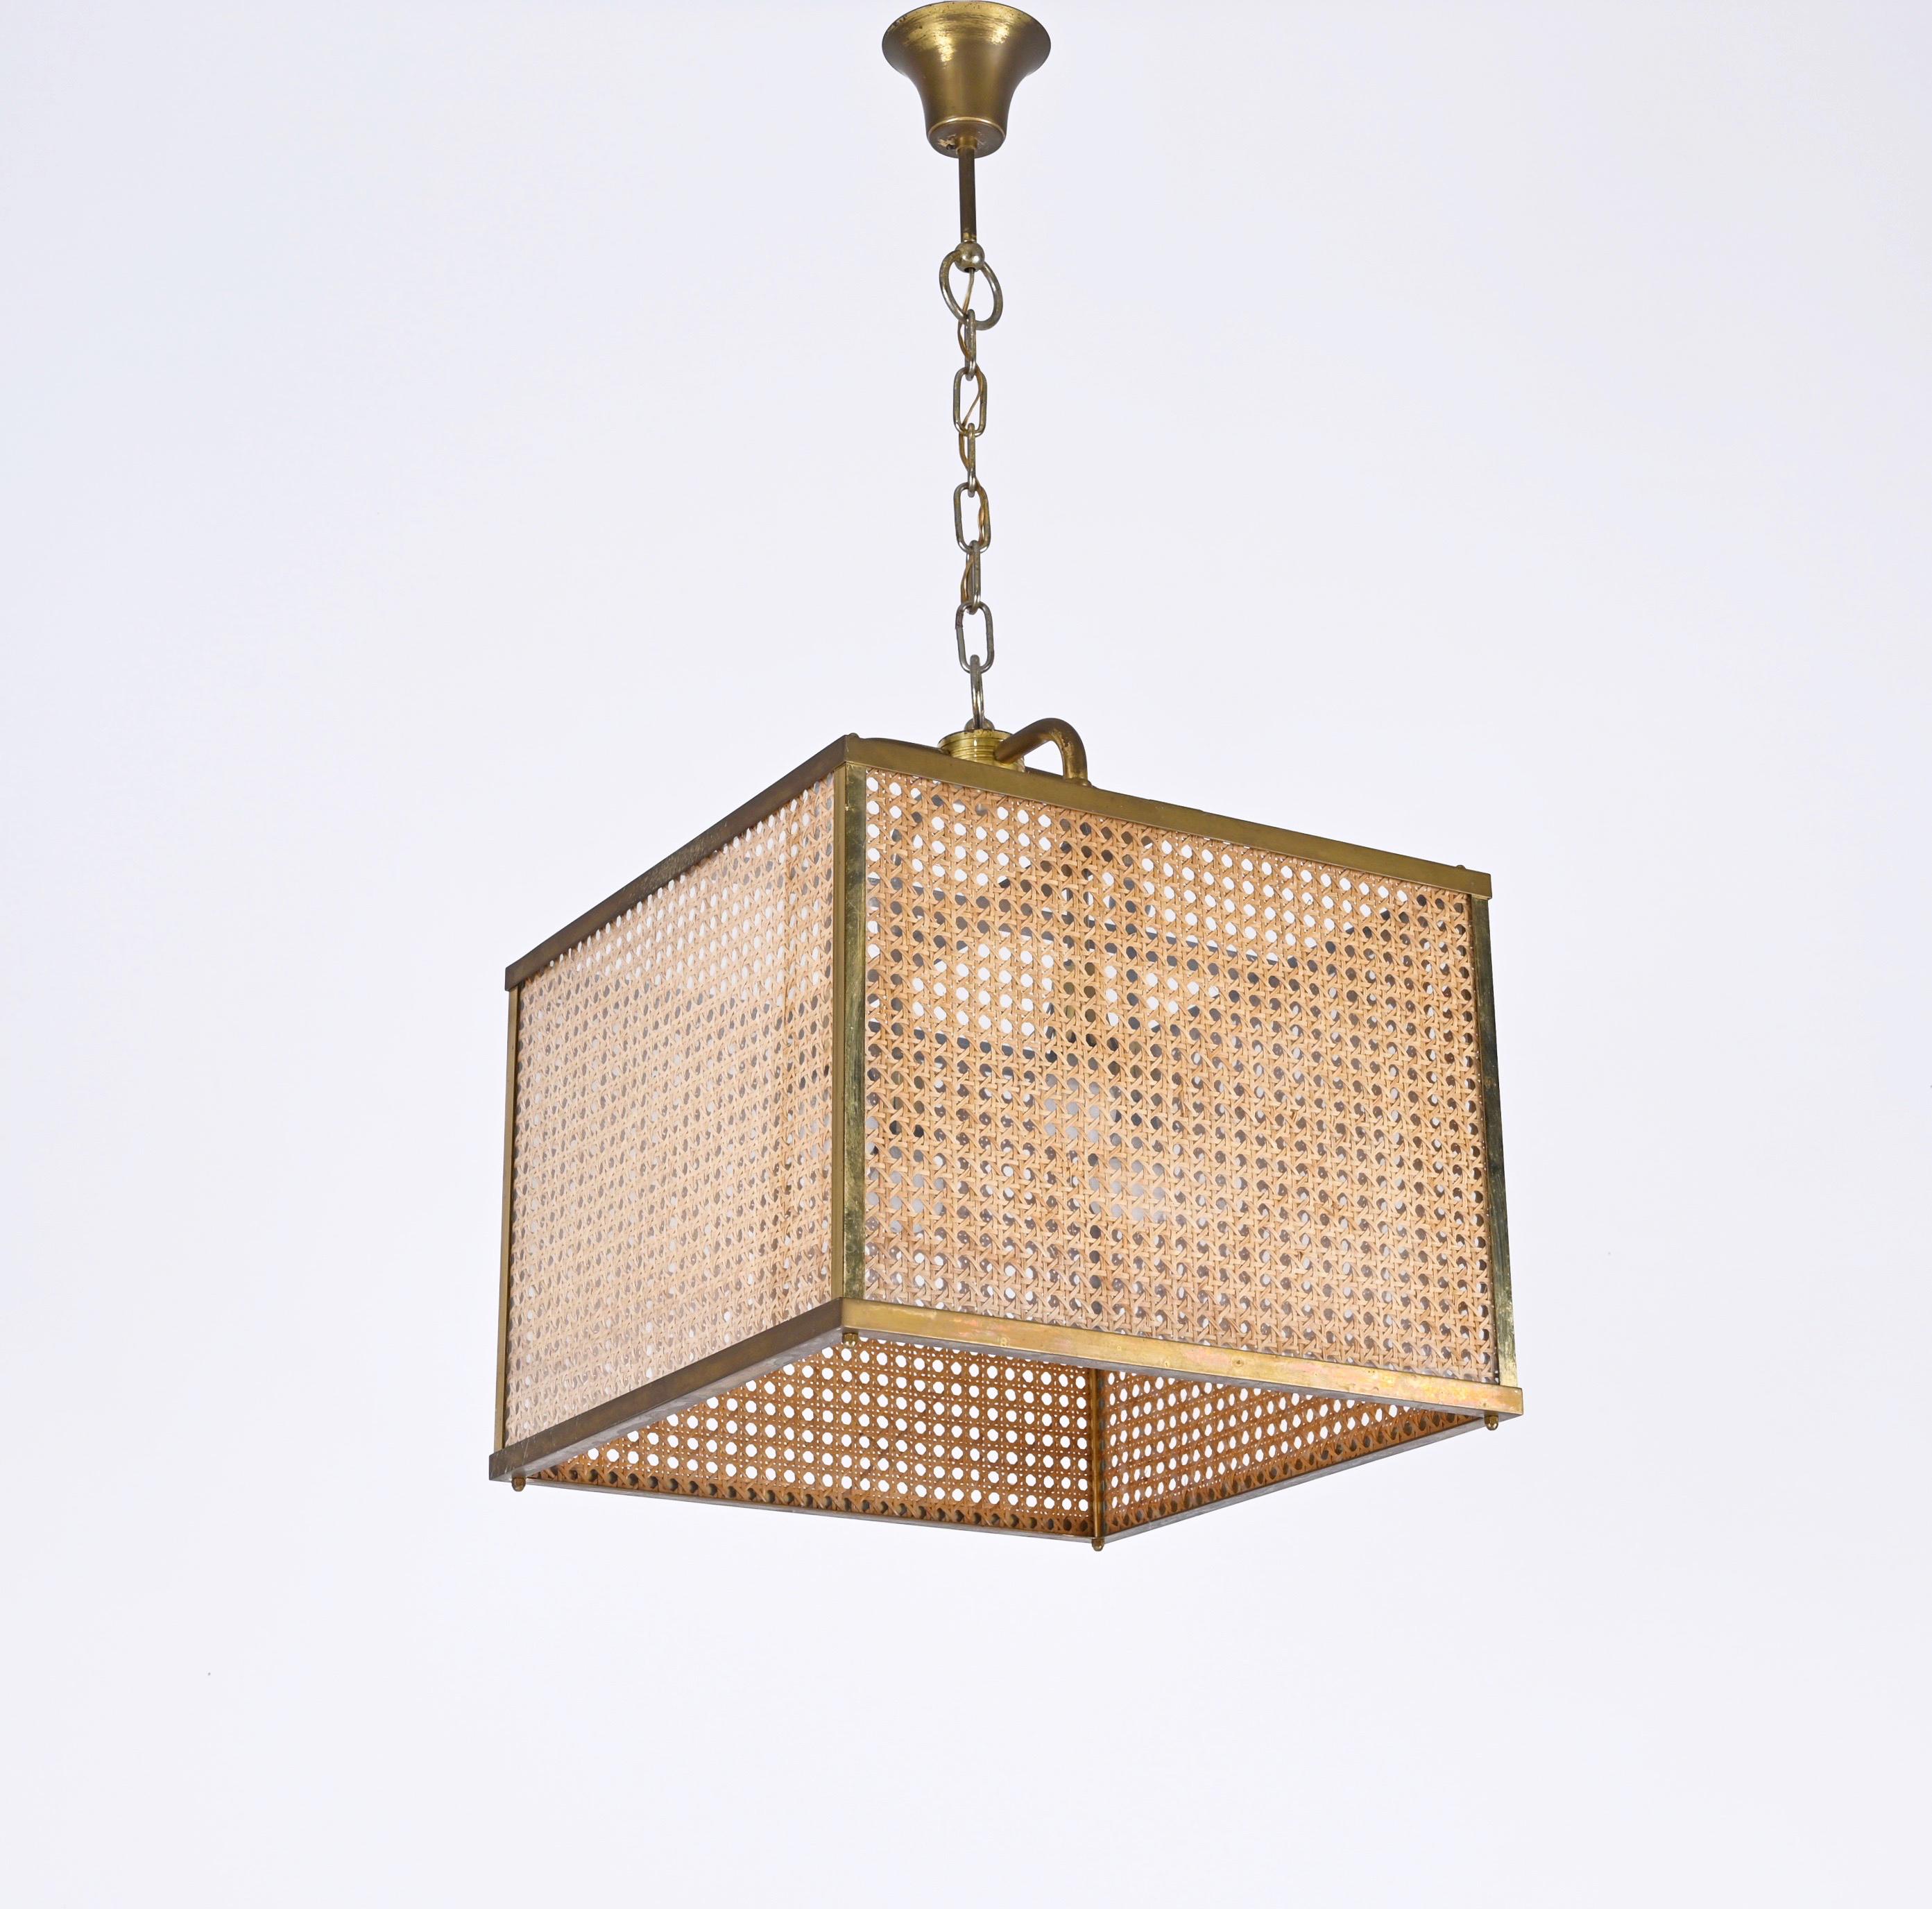 Brass, Vienna Straw Wicker and Glass Square Chandelier Lamp, Italy, 1950s For Sale 6